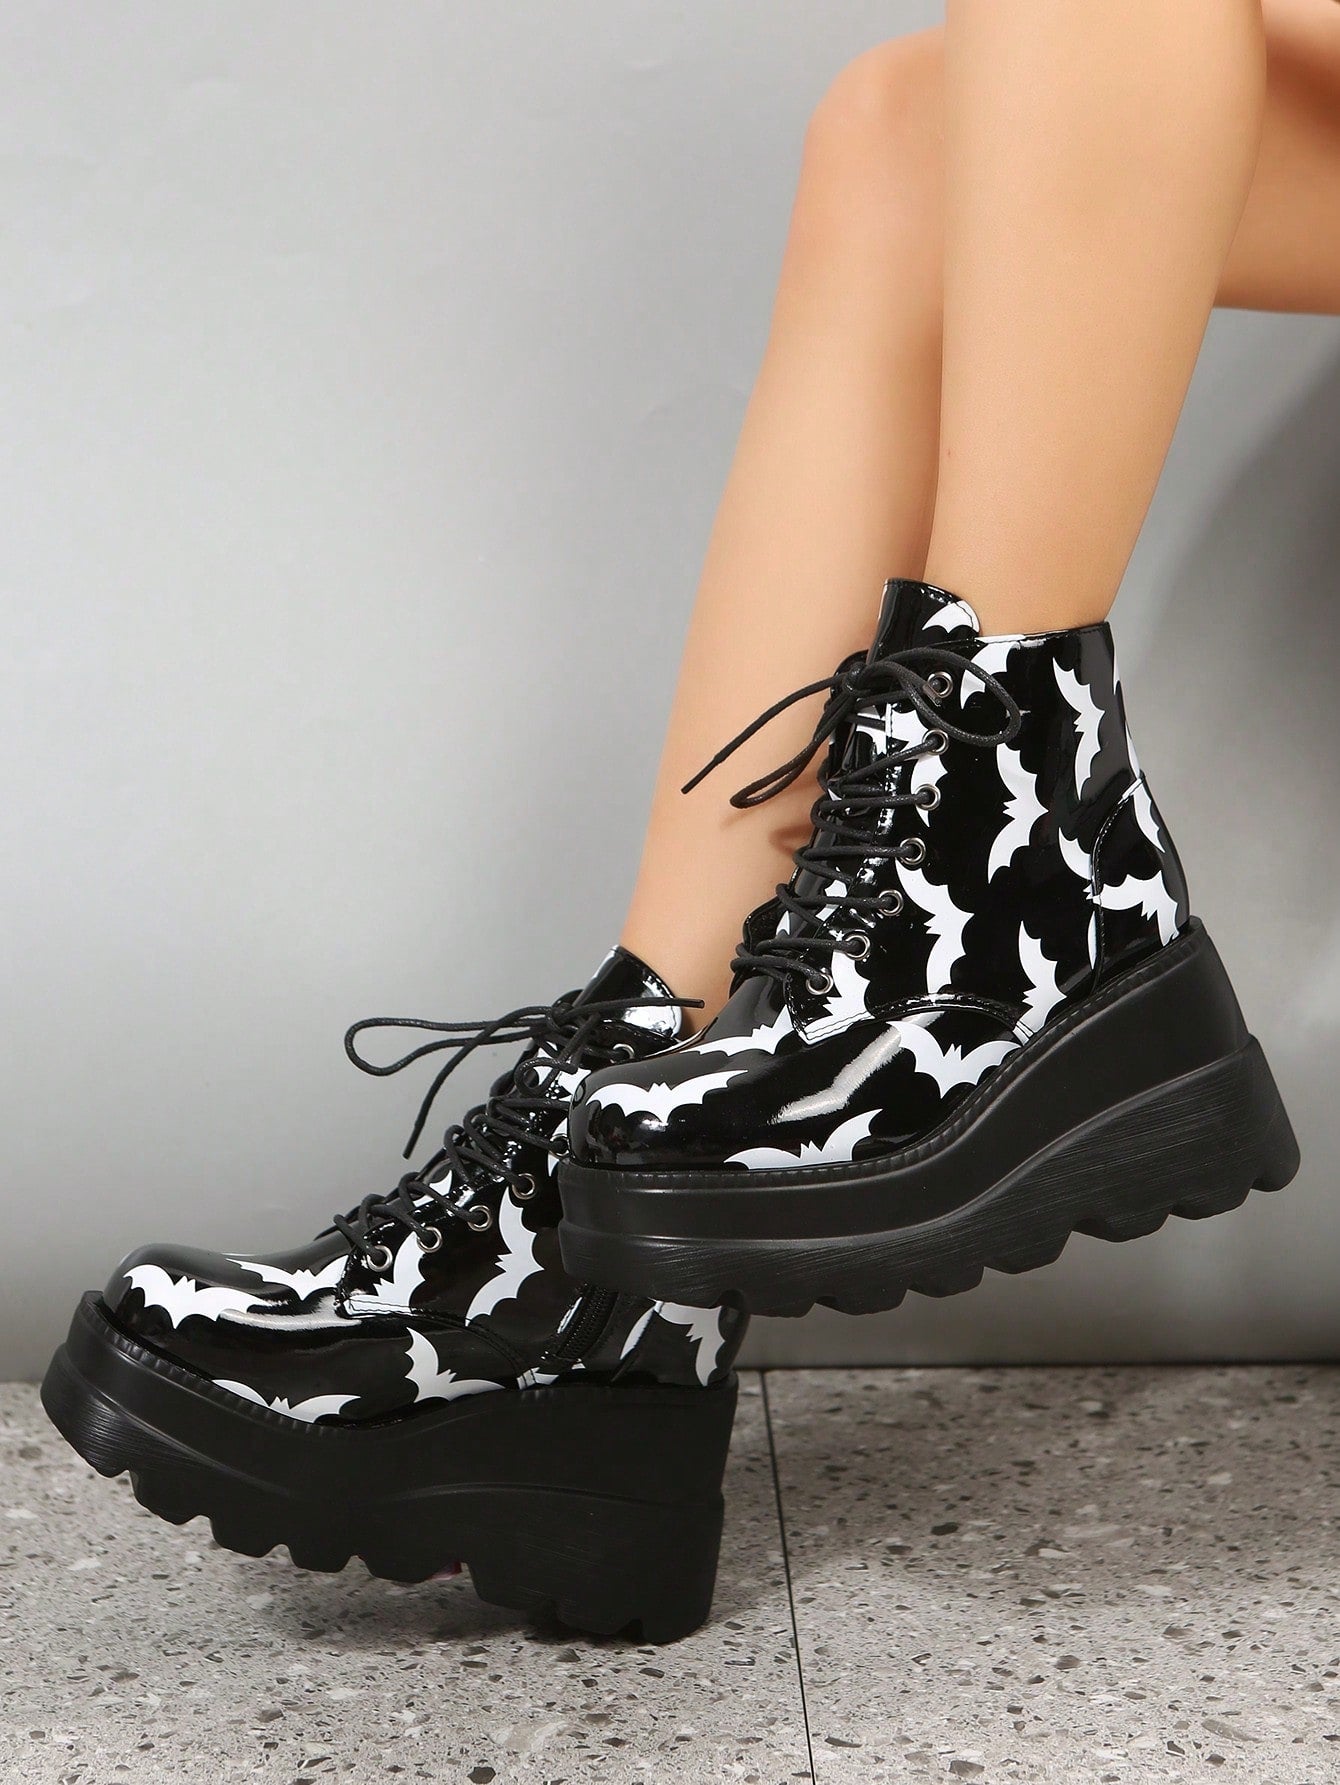 Grunge Punk Women Bat Graphic Lace-up Front Wedge Boots, Funky Outdoor Boots